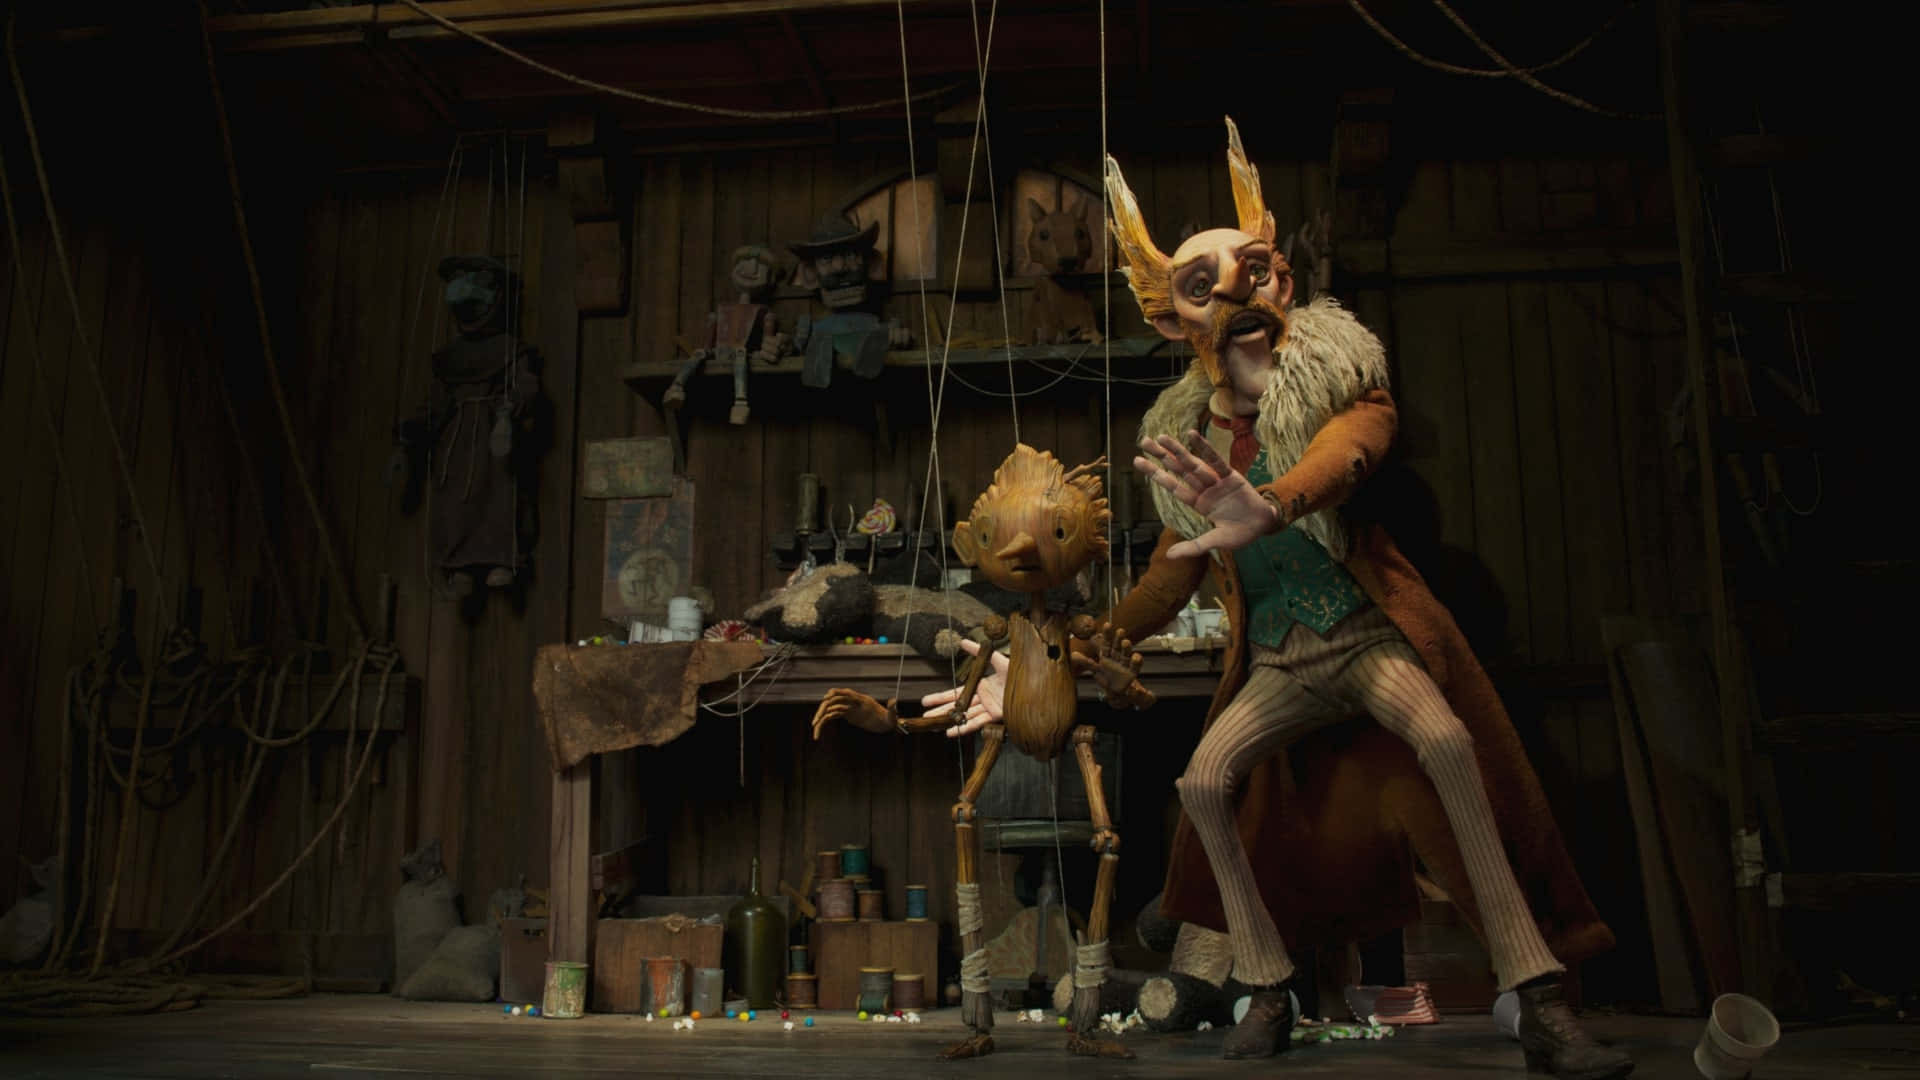 A magical moment between Pinocchio and a friendly cricket in Guillermo Del Toro's adaptation. Wallpaper